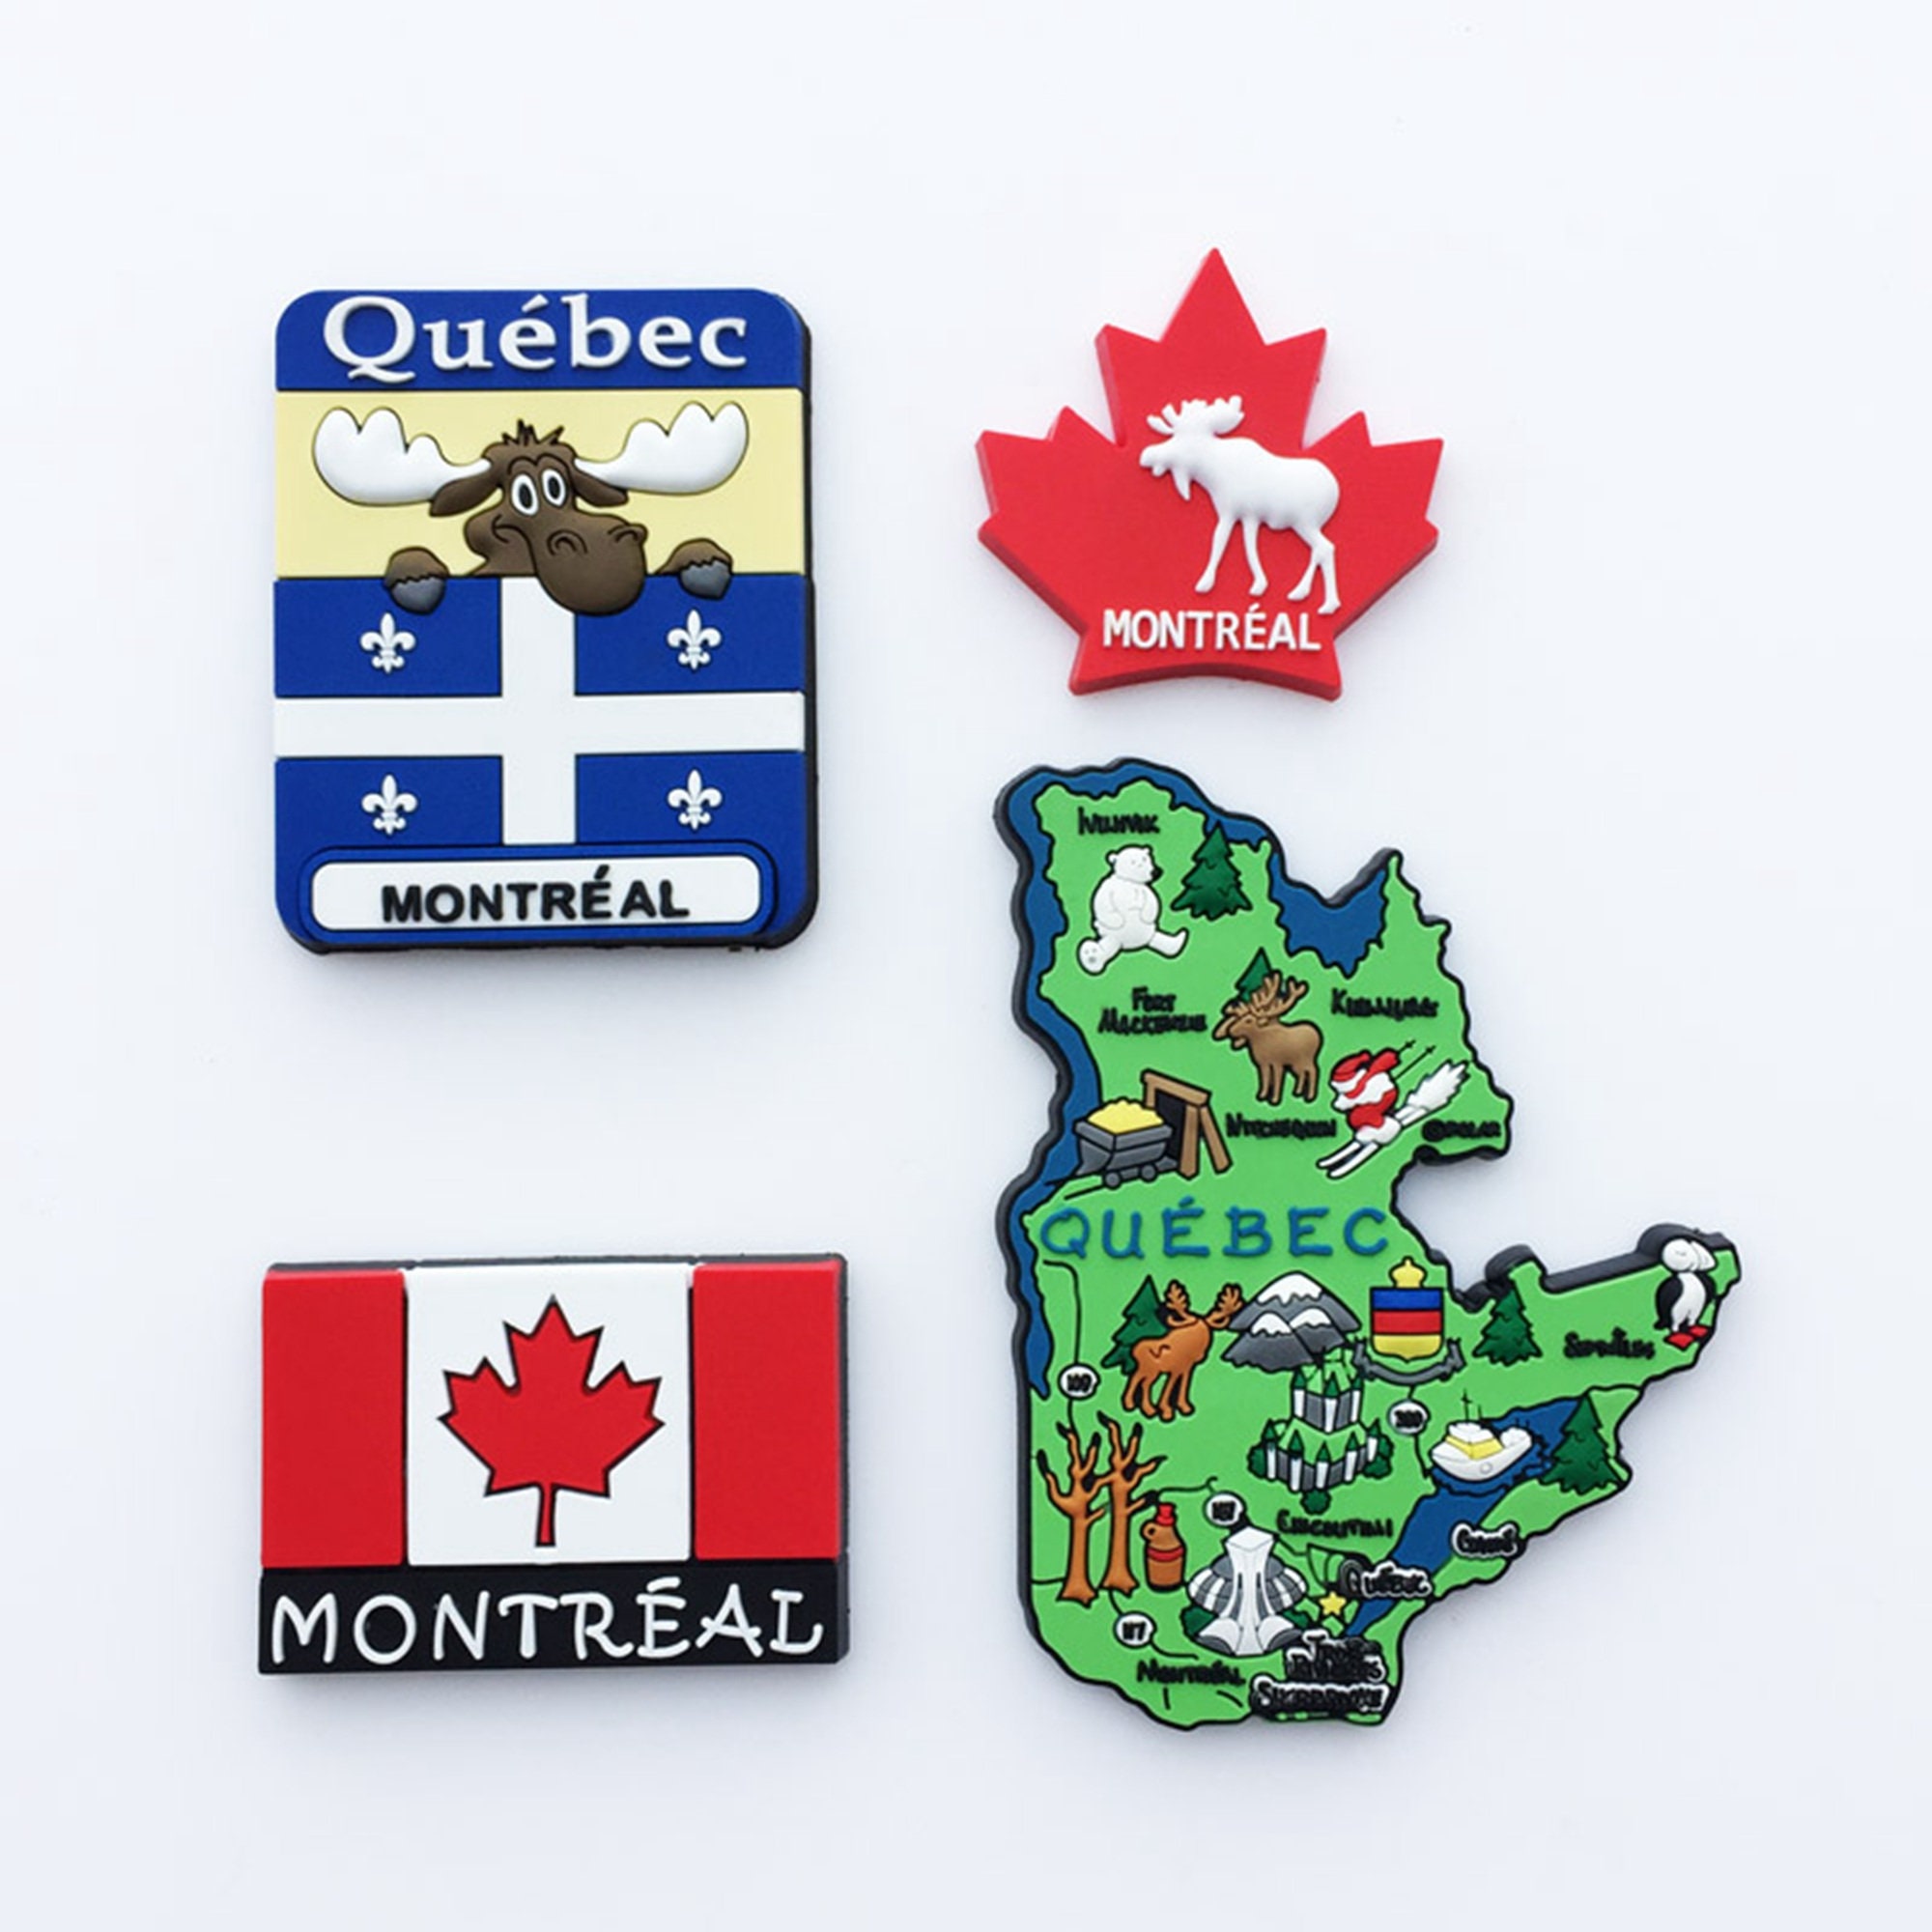 Greetings from Montreal Quebec FRIDGE MAGNET travel souvenir canada 